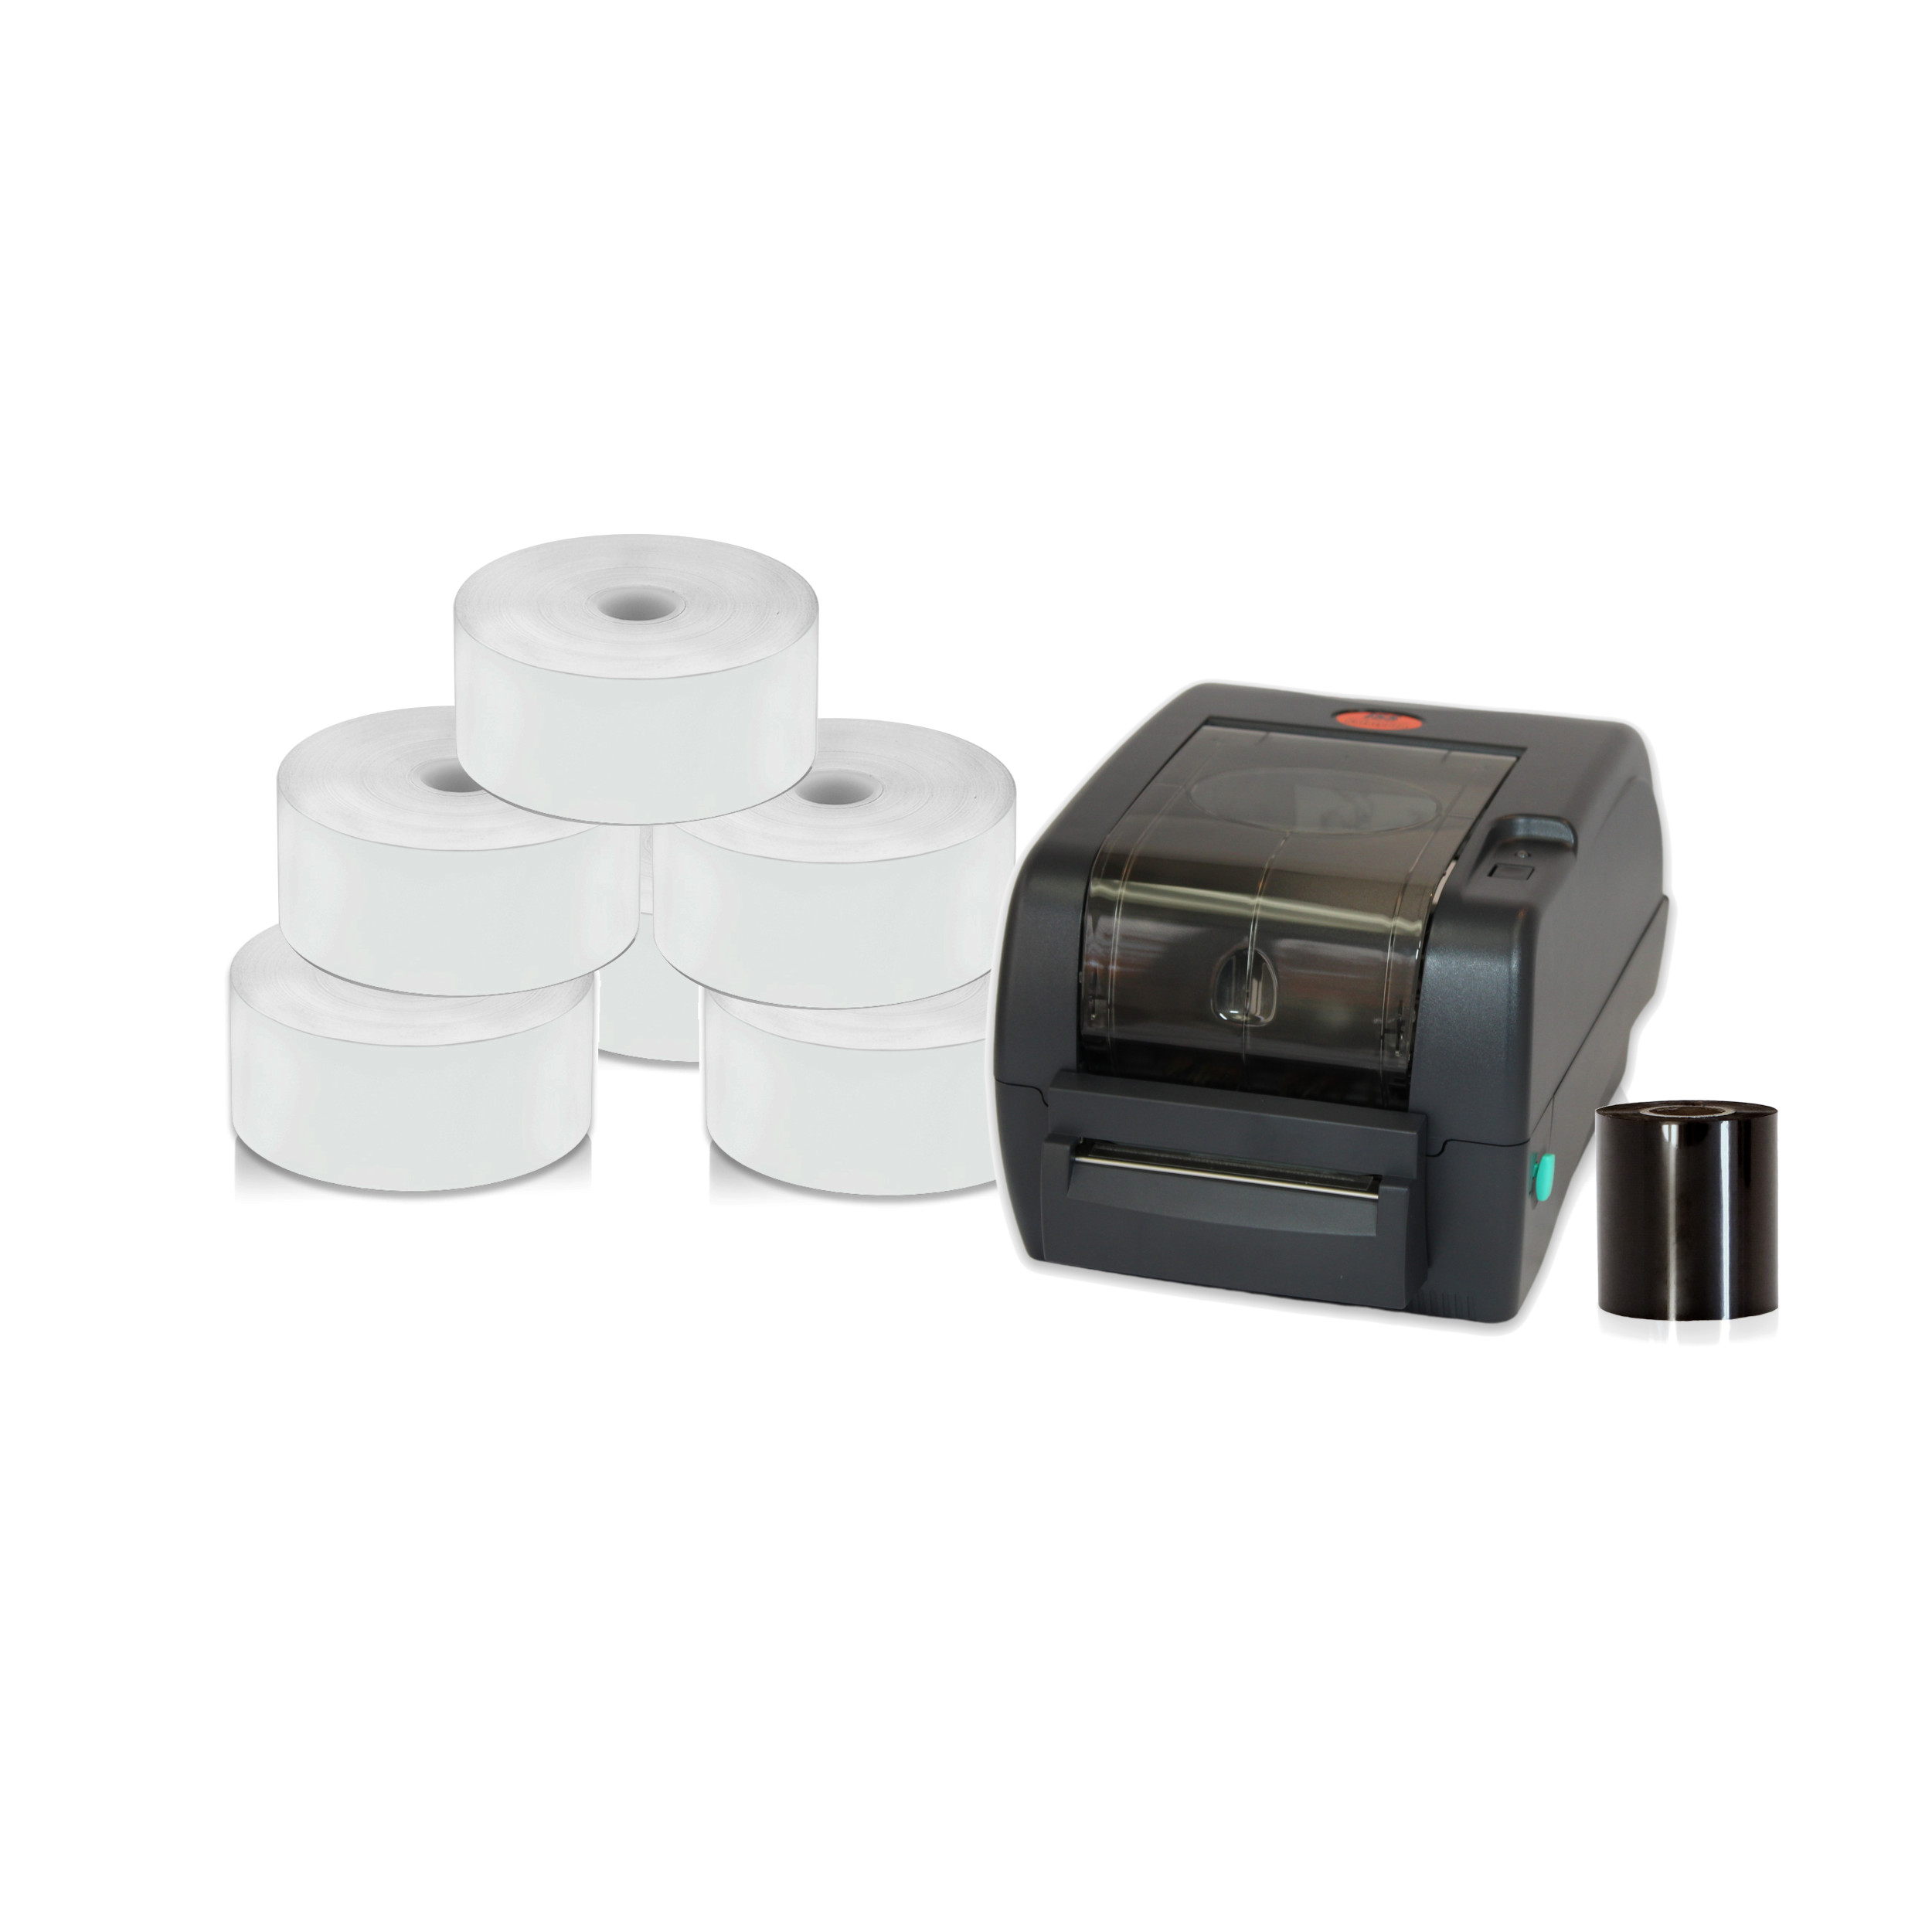 Safety Label Printers and Supplies